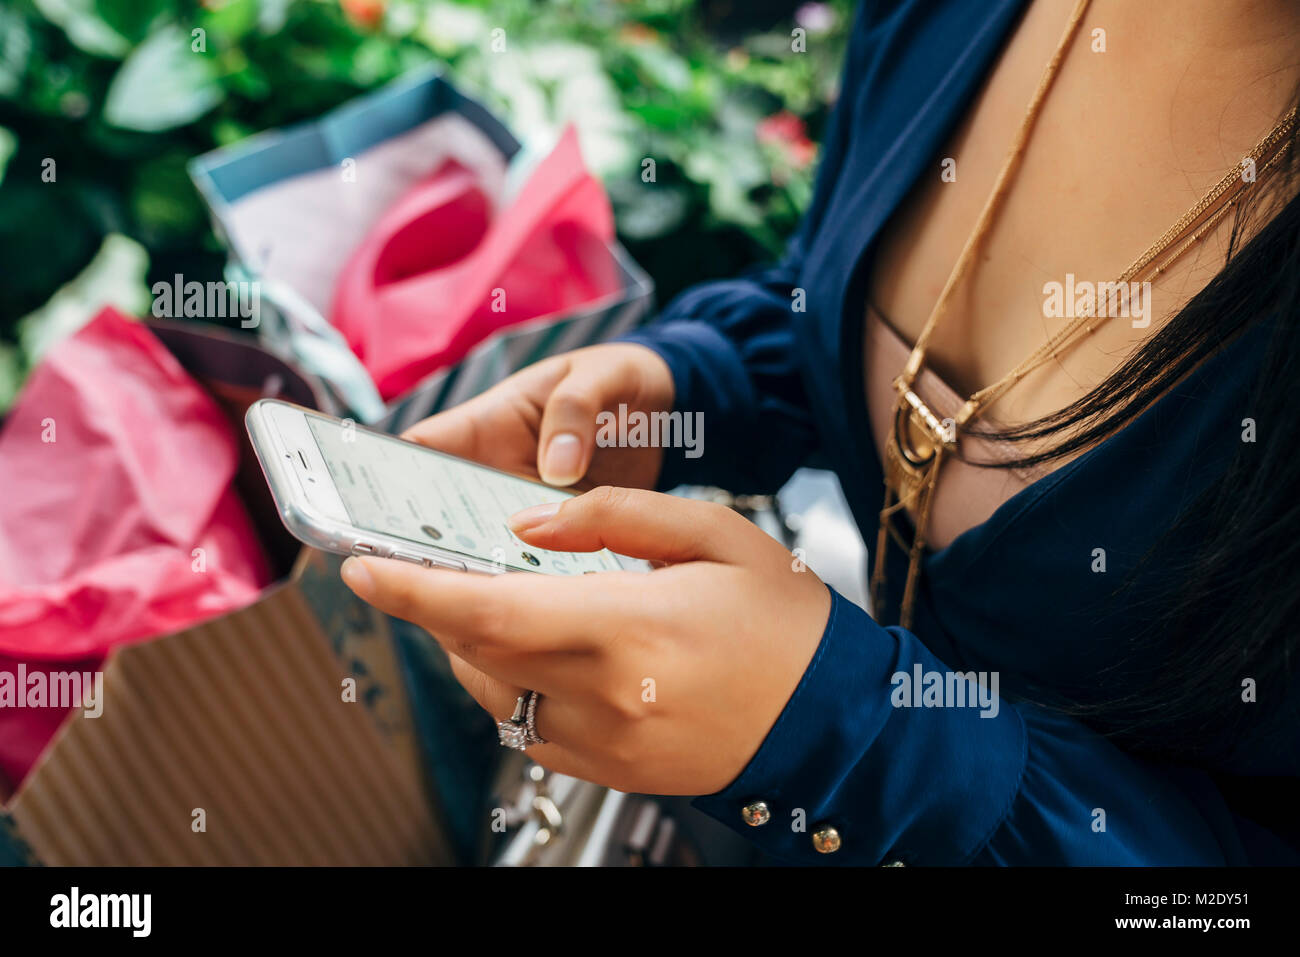 Hands of Hispanic woman with shopping bags texting on cell phone Stock Photo